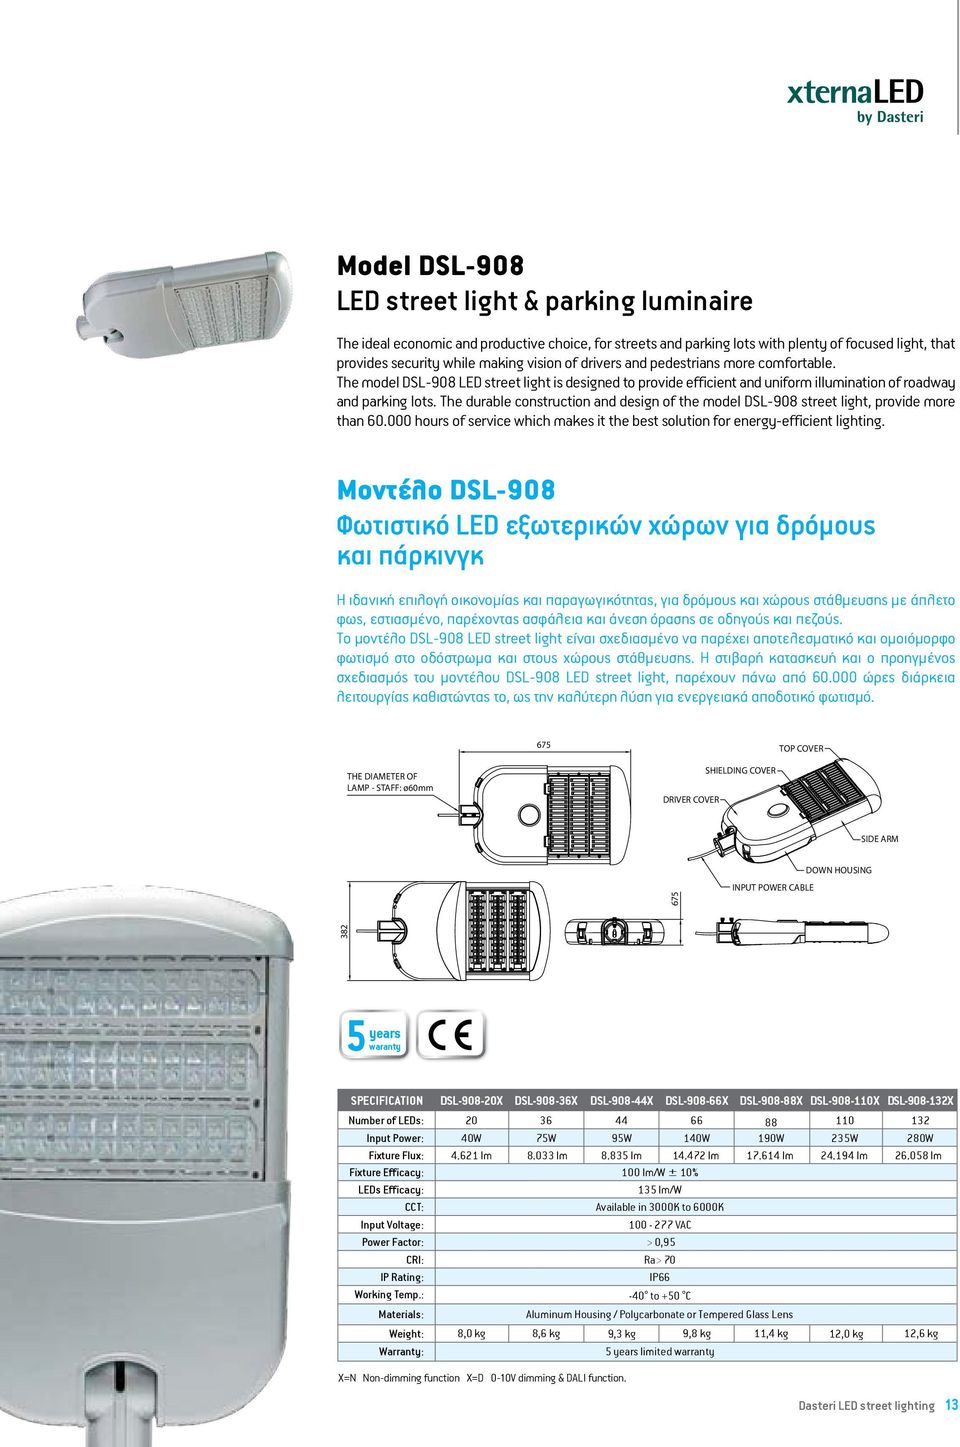 The durable construction and design of the model DSL-908 street light, provide more than 60.000 hours of service which makes it the best solution for energy-efficient lighting.